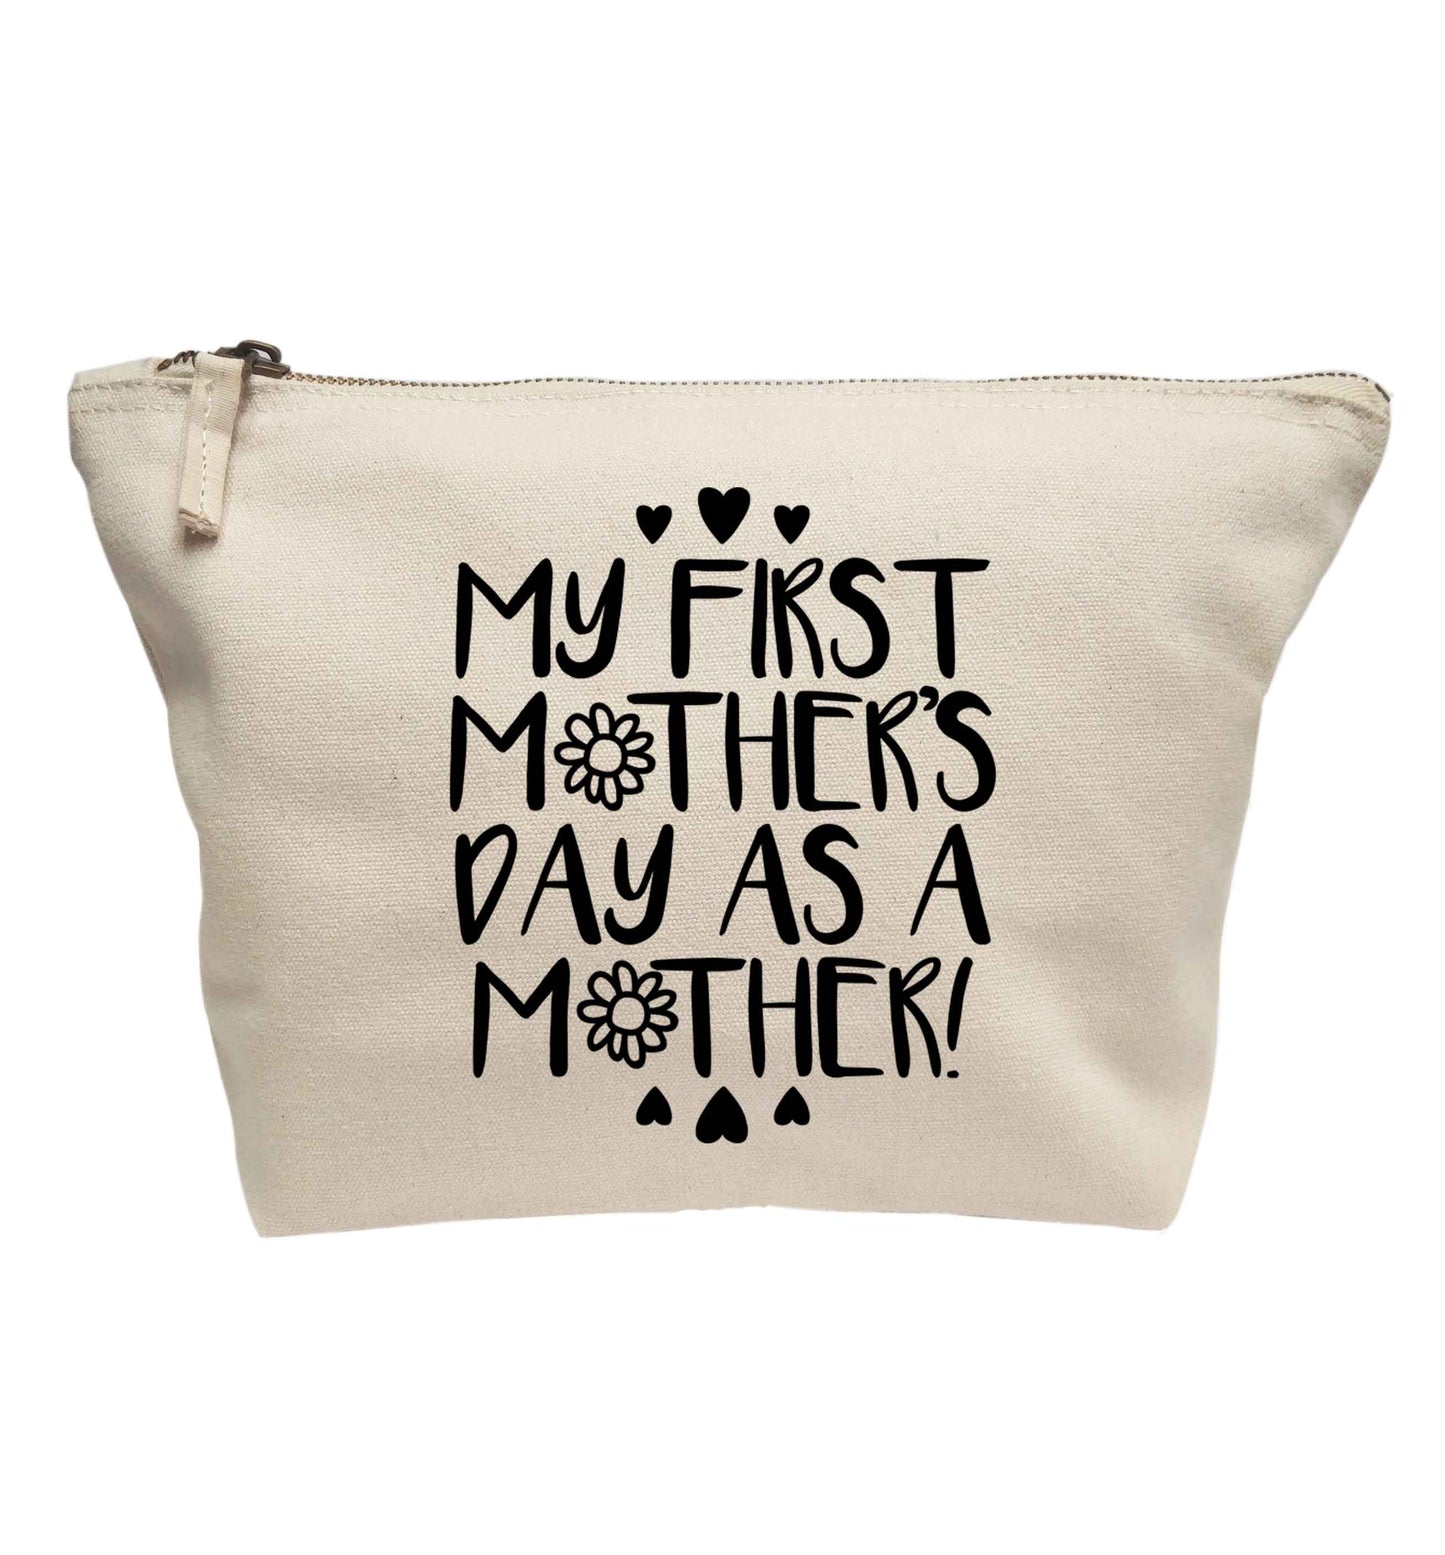 It's my first mother's day as a mother | Makeup / wash bag